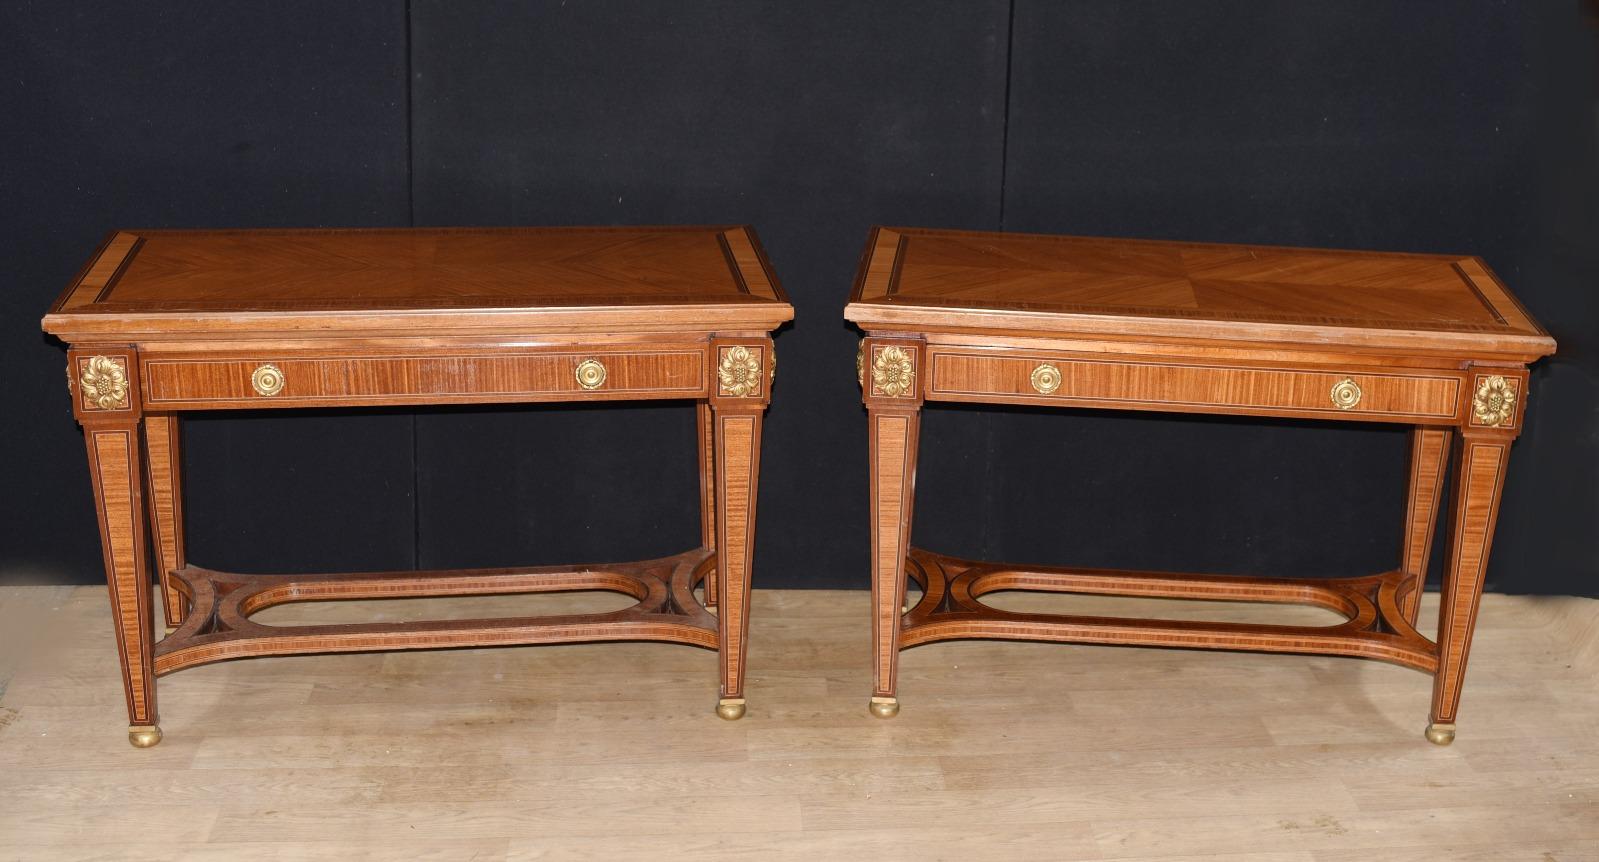 - Wonderful pair of French Empire antique console tables
- Classic Empire look with tapered straight lines to design
- Clean and minimal aesthetic perfect for contemporary interiors
- We date this wonderful pair to circa 1890.